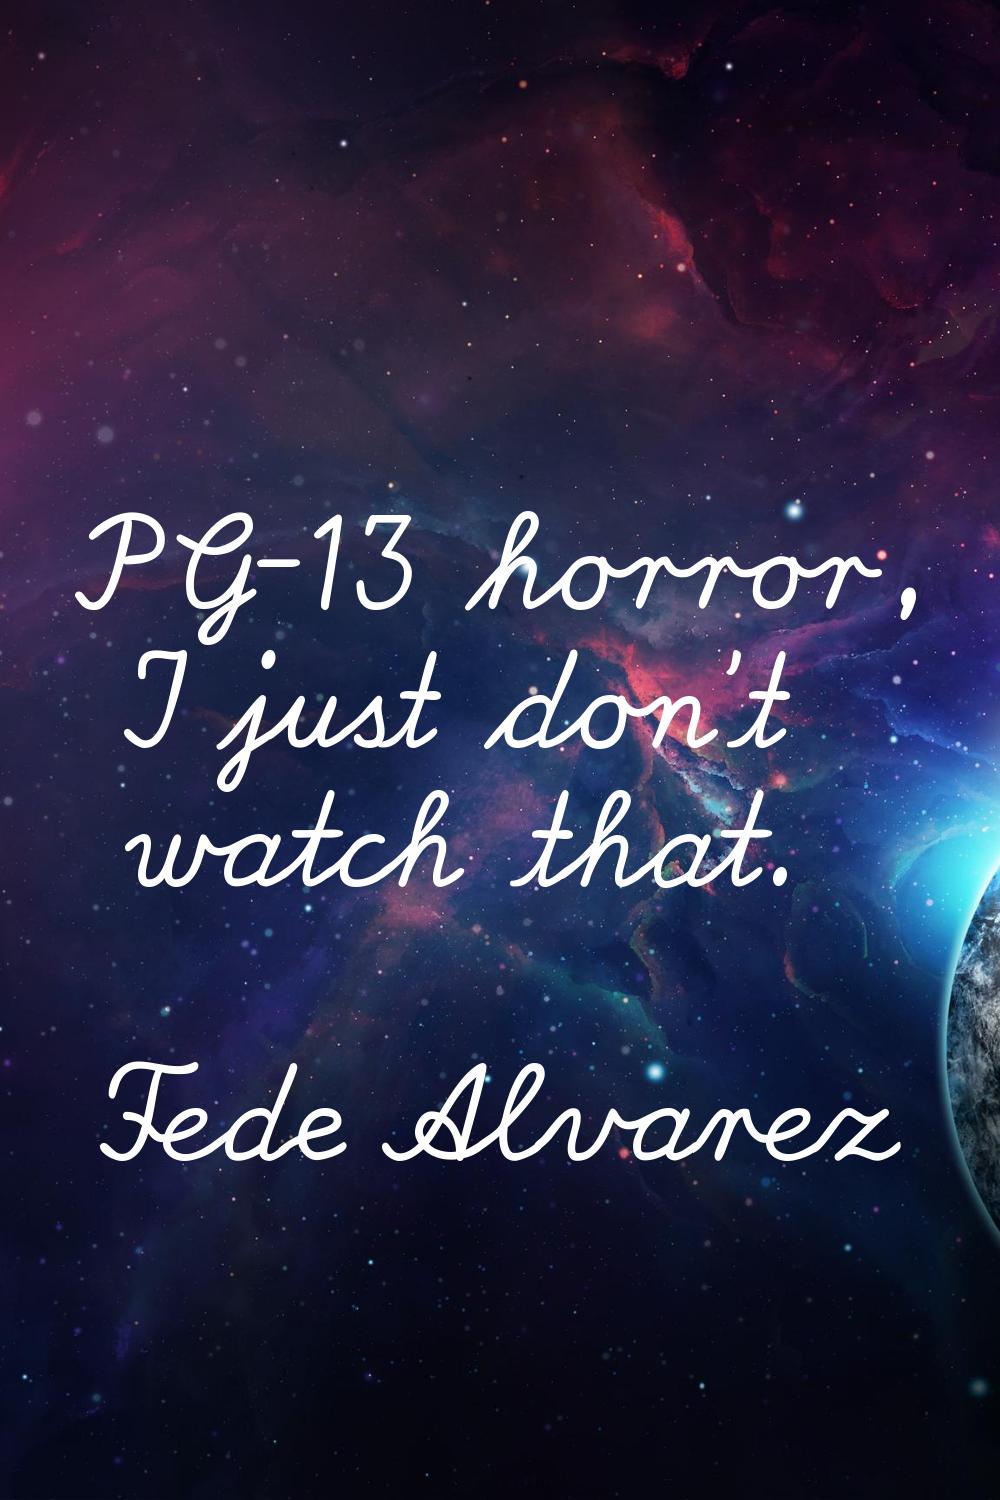 PG-13 horror, I just don't watch that.